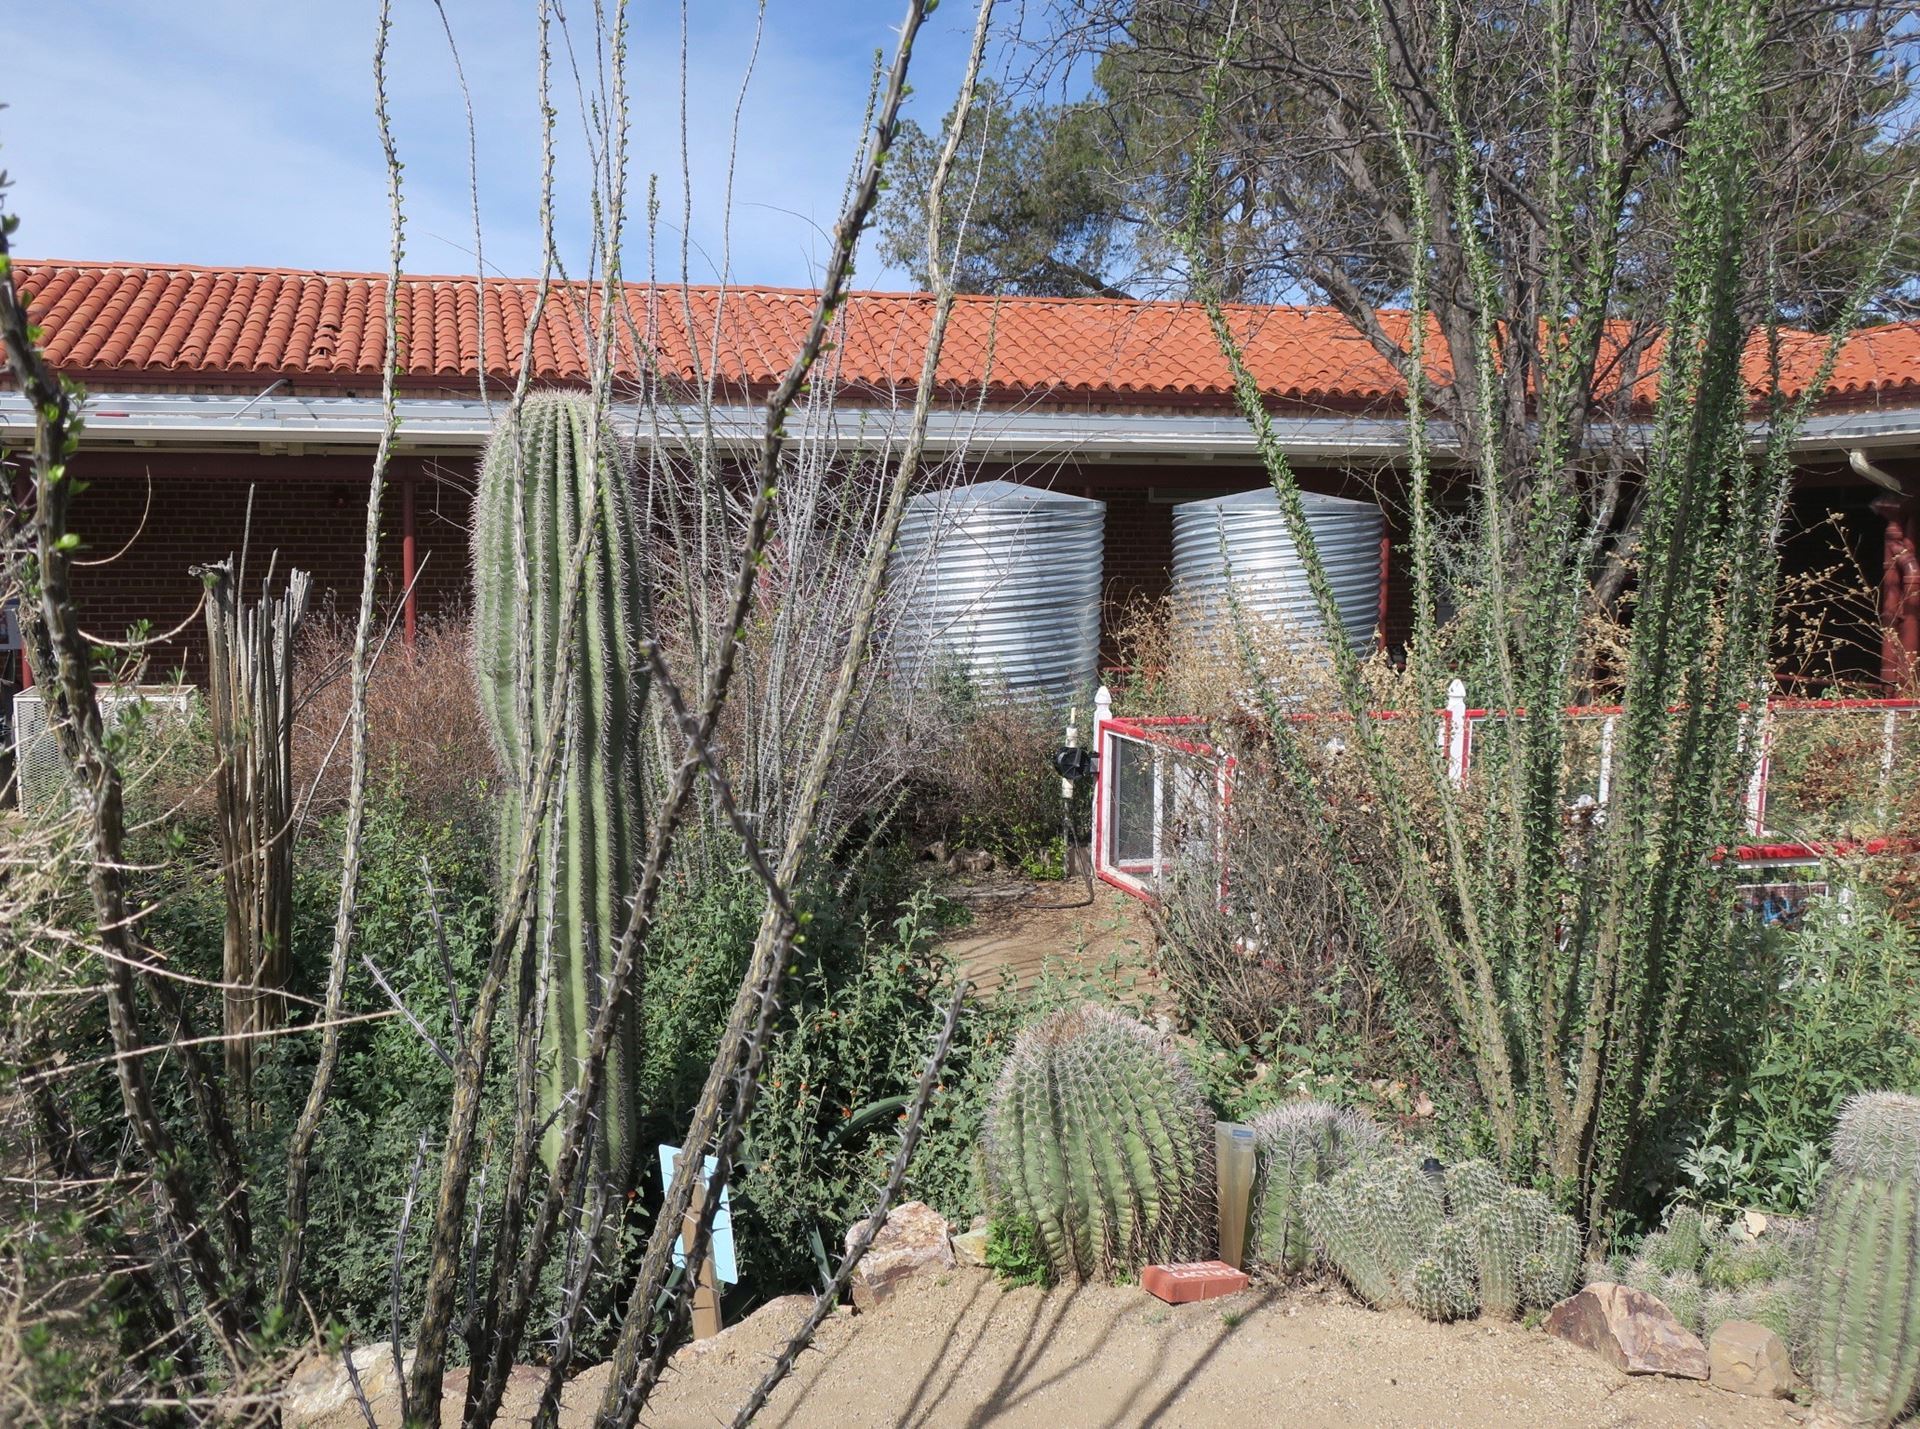 view of home with rooftop rainwater harvesting directed to cistern storage and basins planted with cactus and native plants 